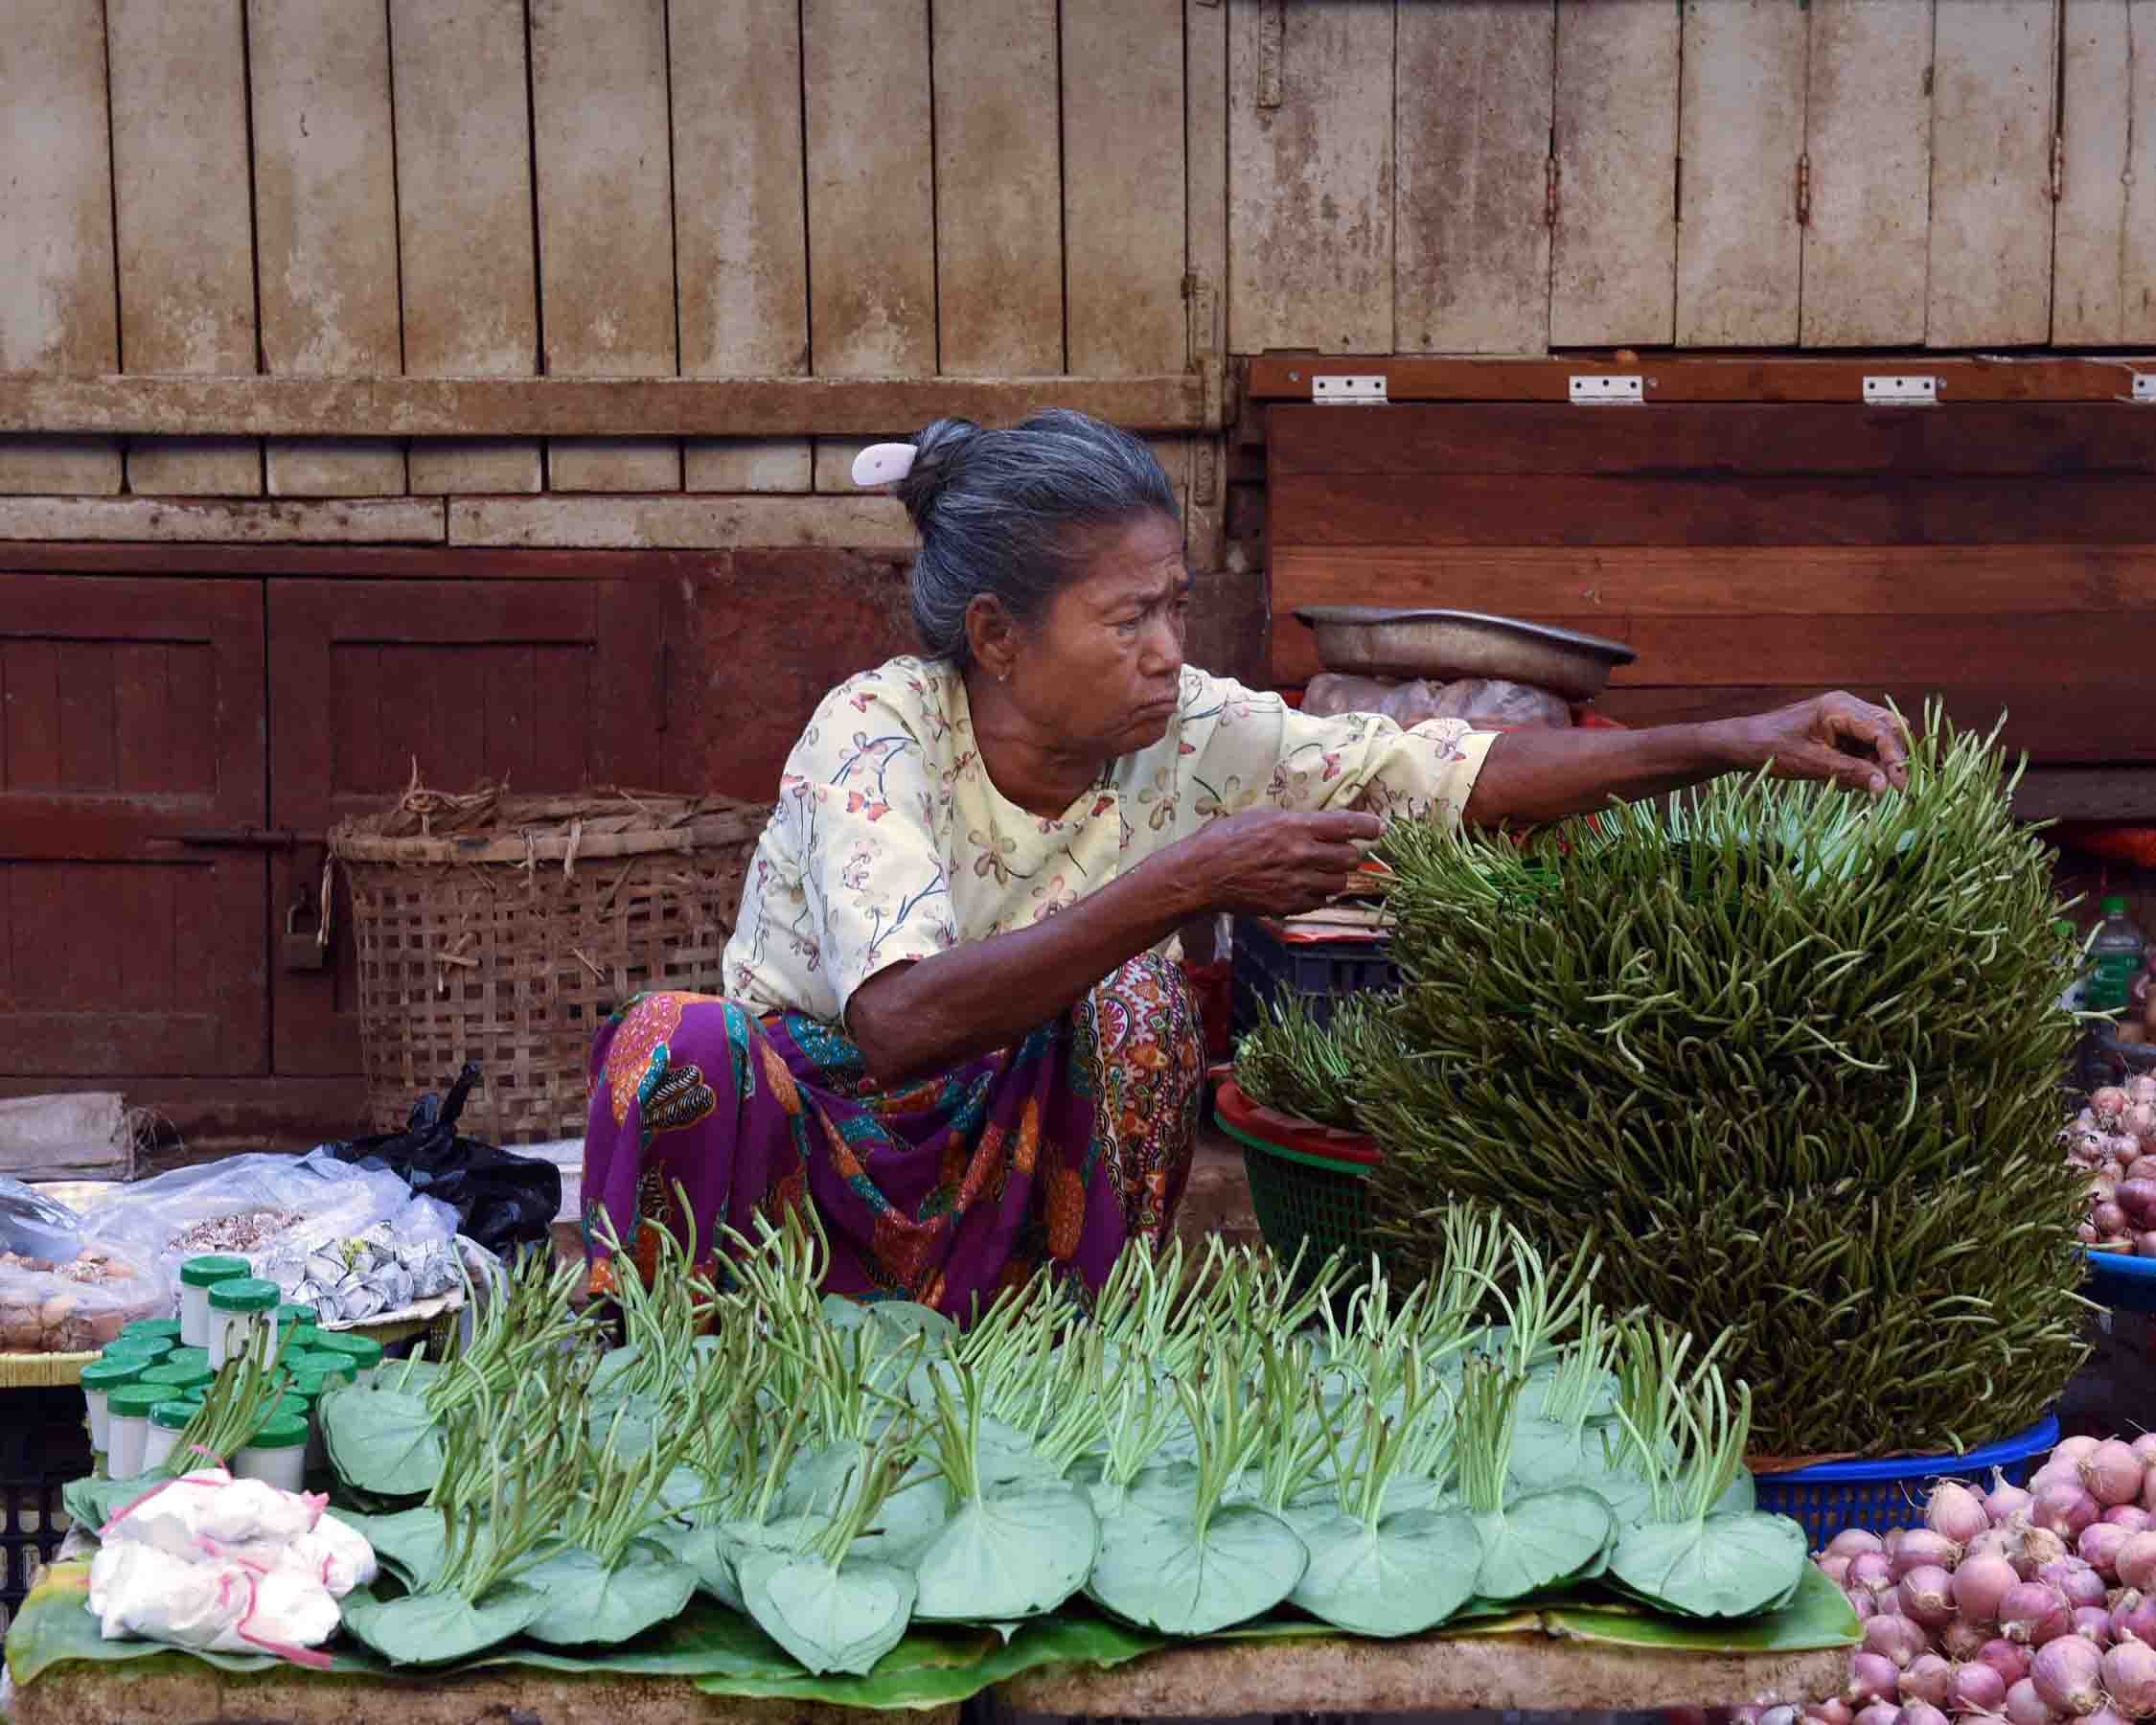 Orderly bundles of betel leaves, a versatile medicinal plant used to reduce heat in the body and fight ailments like colds, coughs, or excess swelling. Leaves can be boiled like with ginger and jaggery or used like a compress. (Photo: Naomi Hellmann)